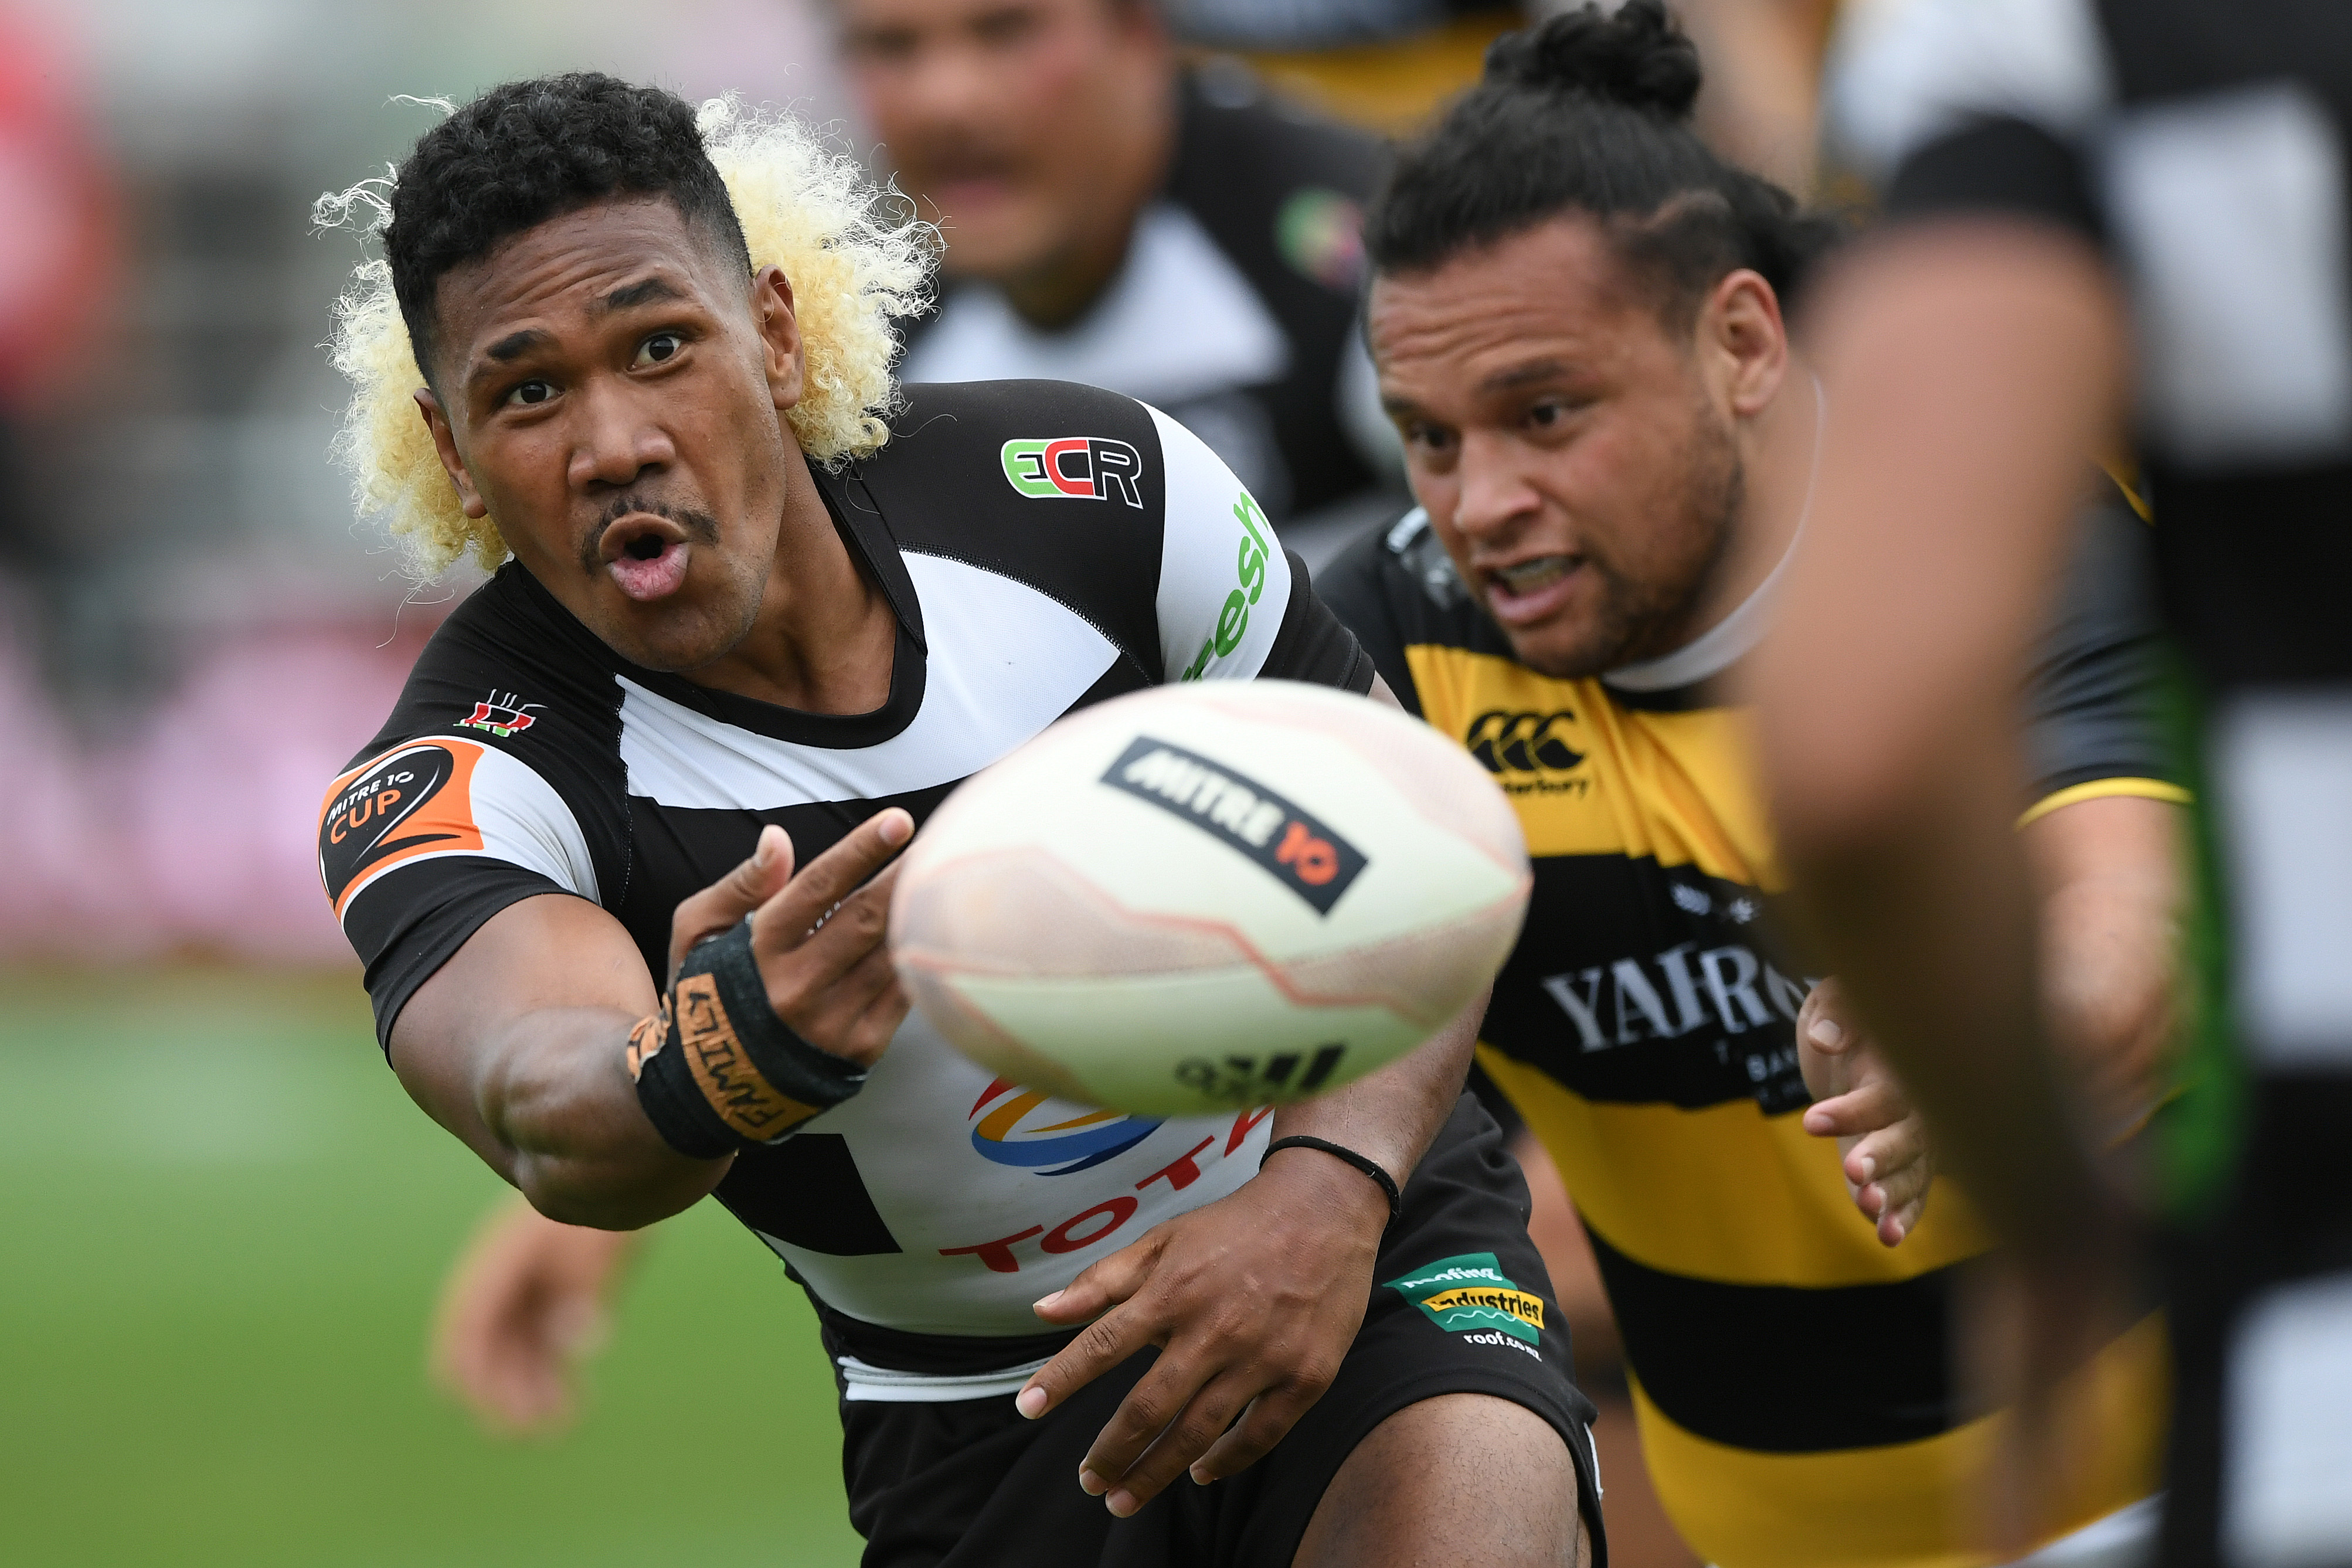 PREVIEW: Mitre 10 Cup Championship final – Hawke’s Bay v Northland